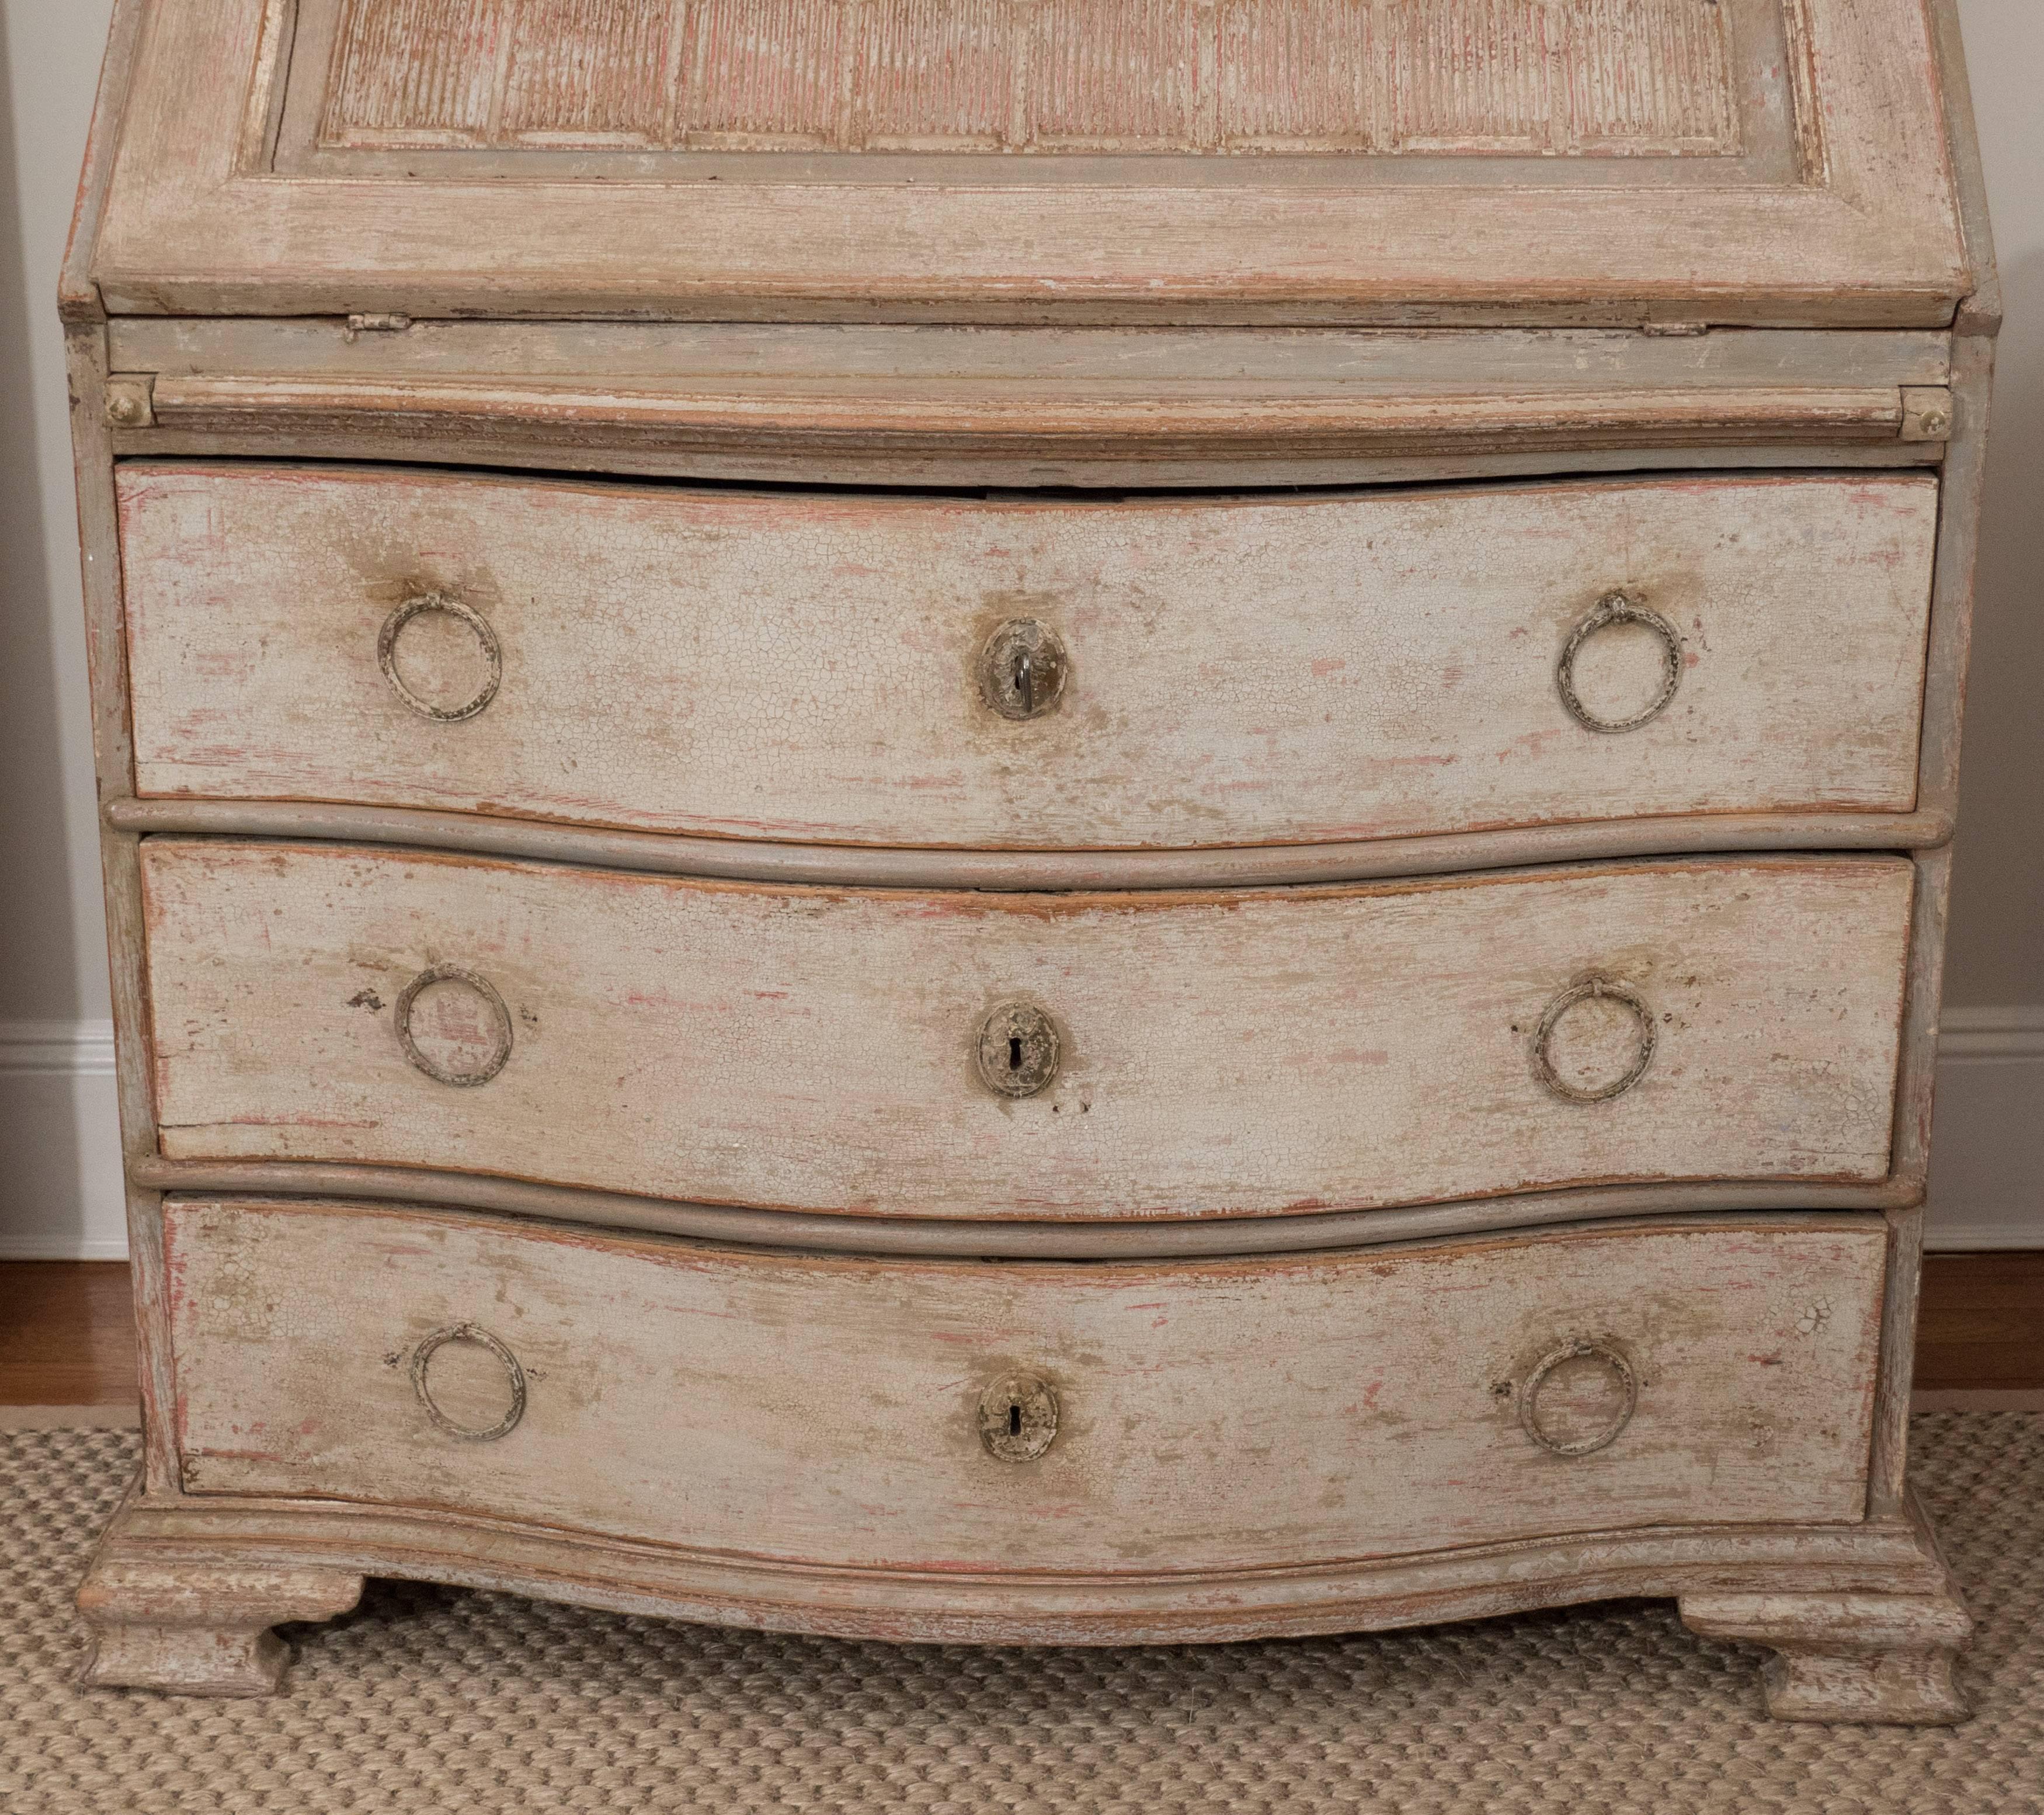 One can design a room around this spectacular piece. Painted in a lovely gray with terra cotta colored interior, this secretary is not only beautiful, but it is quite practical as well. The top features an arched cornice with dentil molding